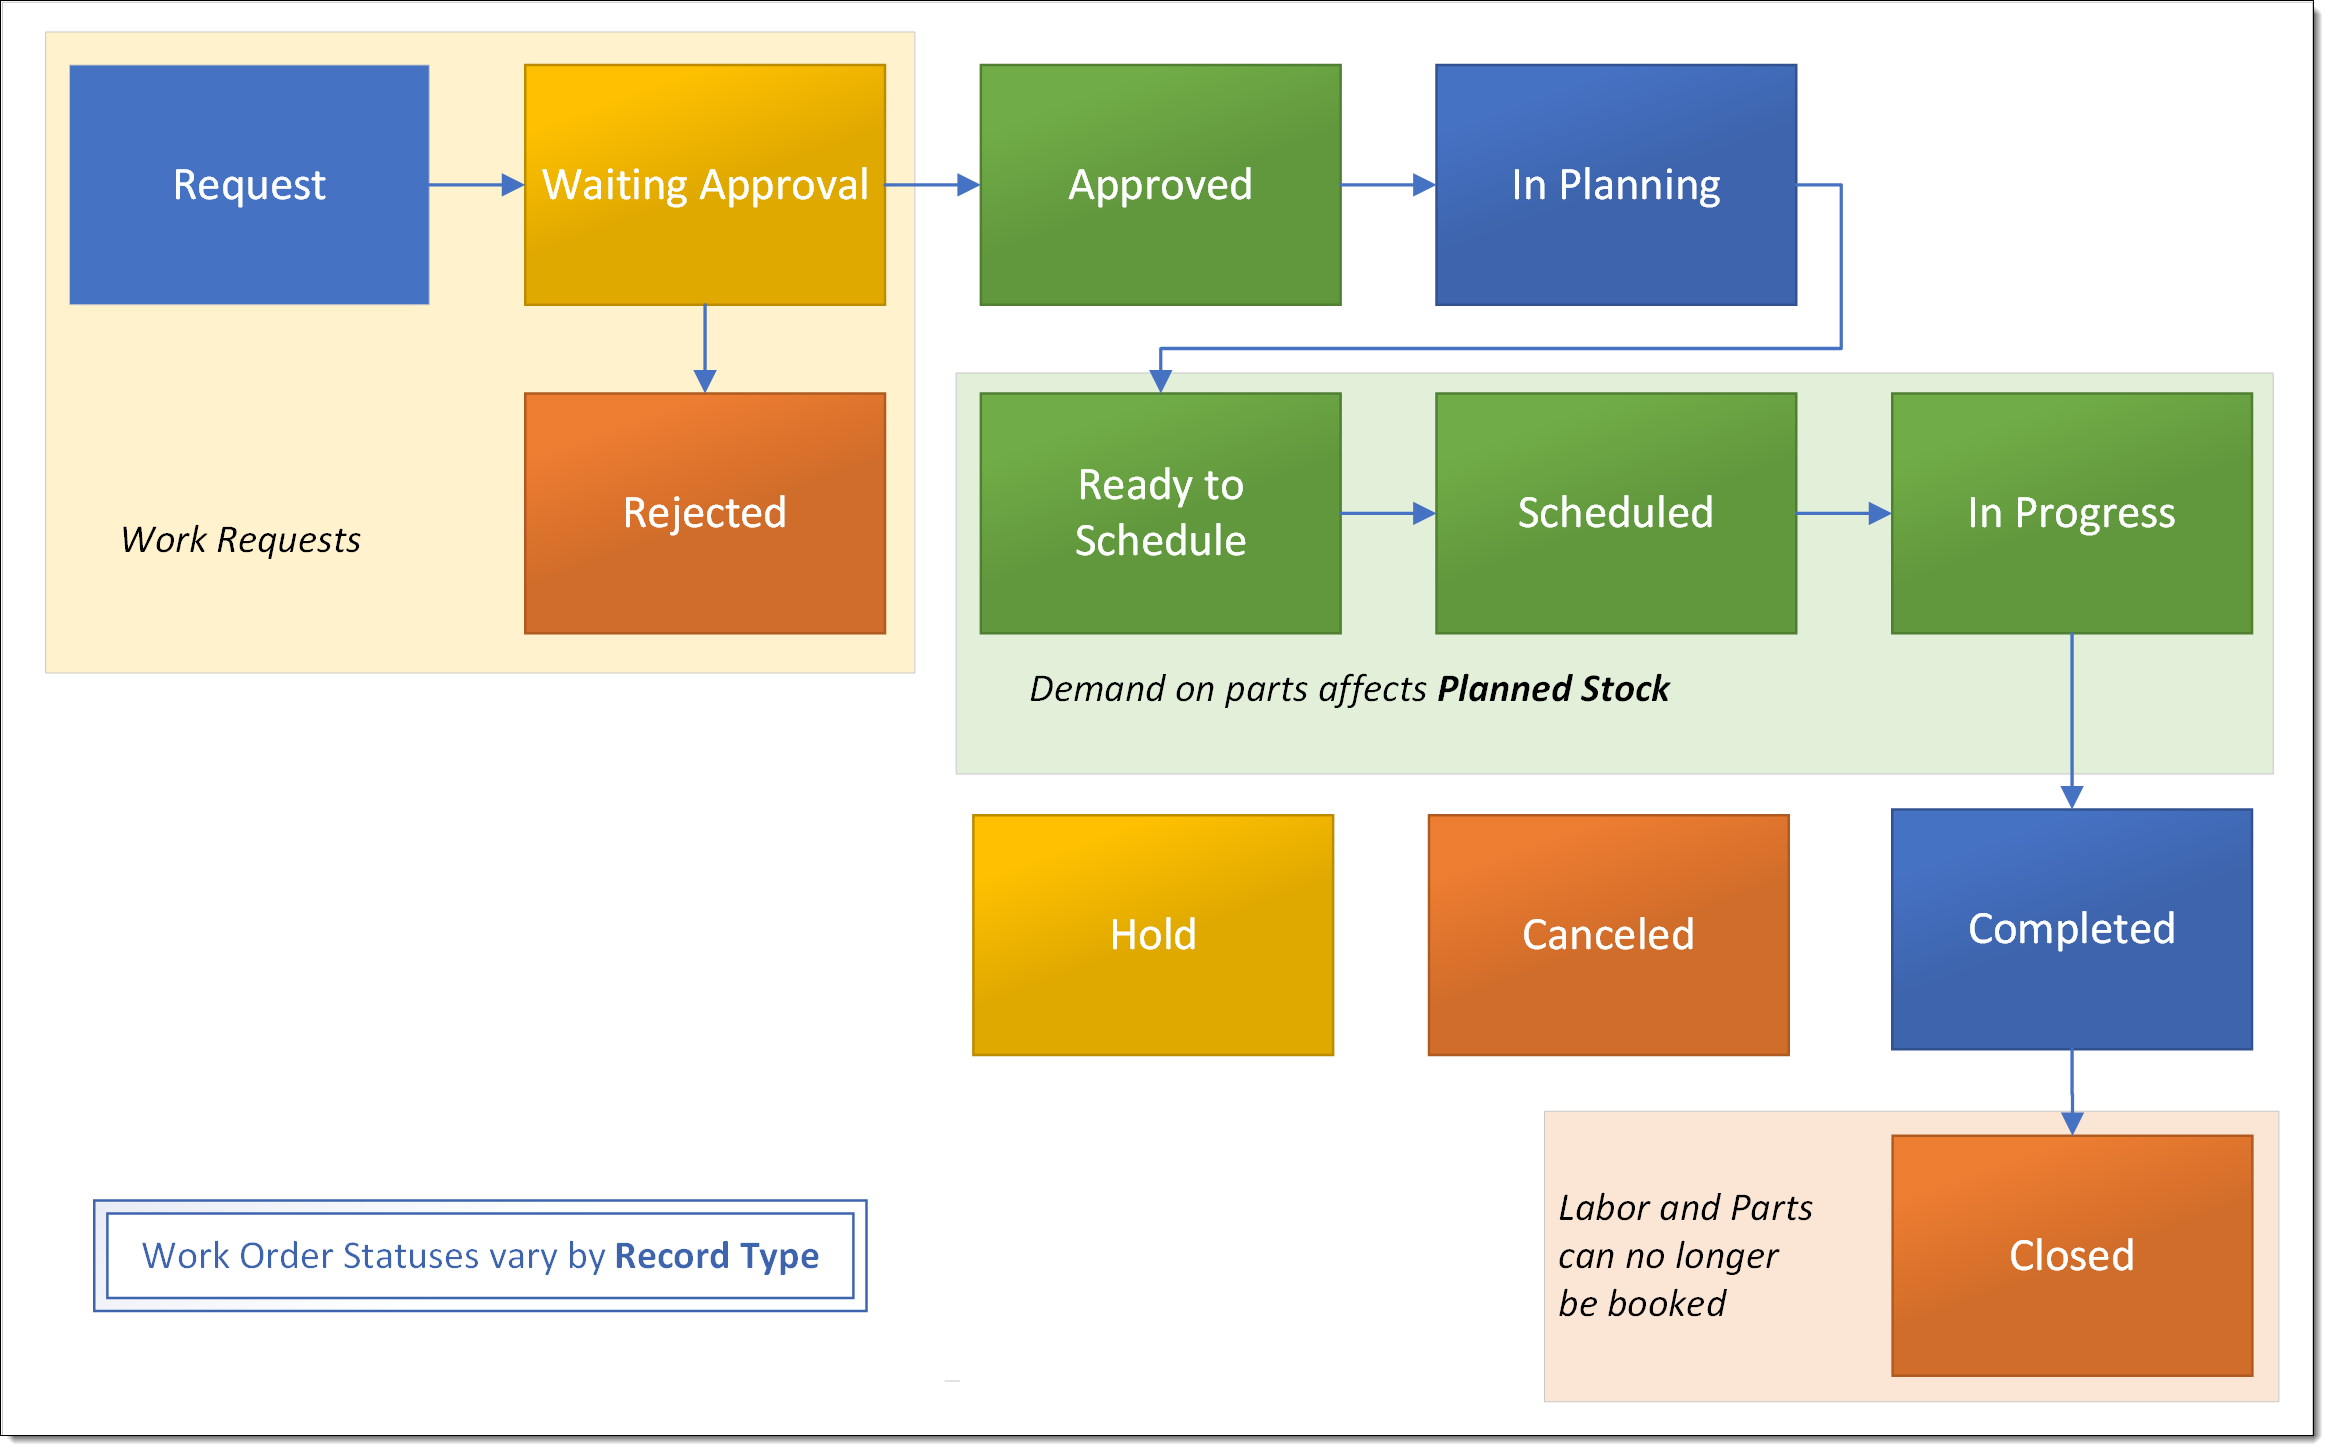 Flow chart showing sequences of work order statuses